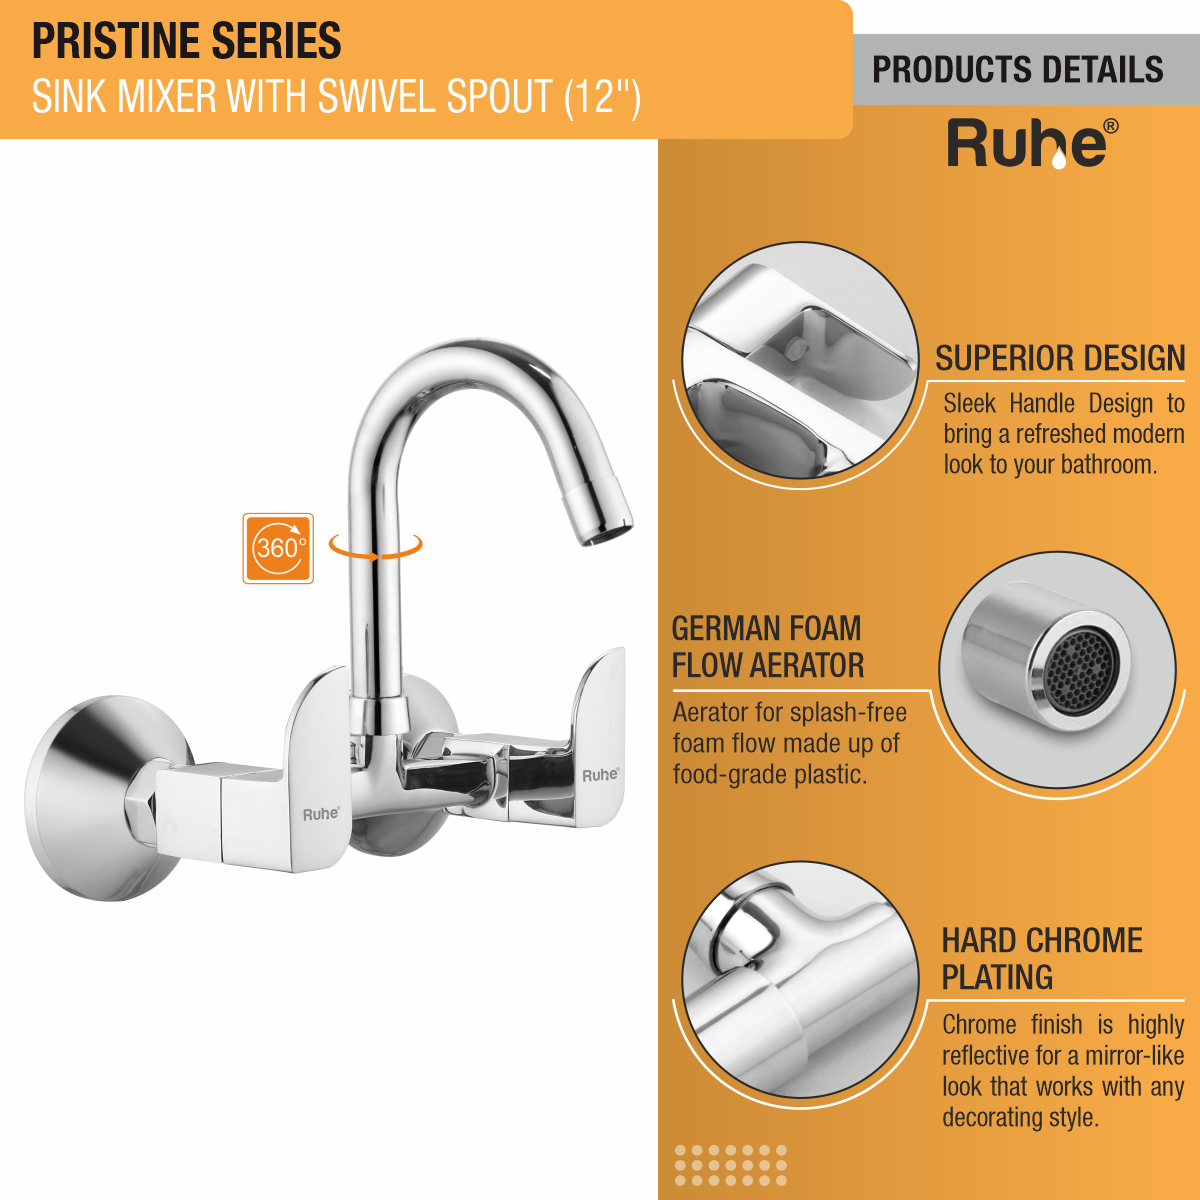 Pristine Sink Mixer with Small (12 inches) Round Swivel Spout Faucet product details